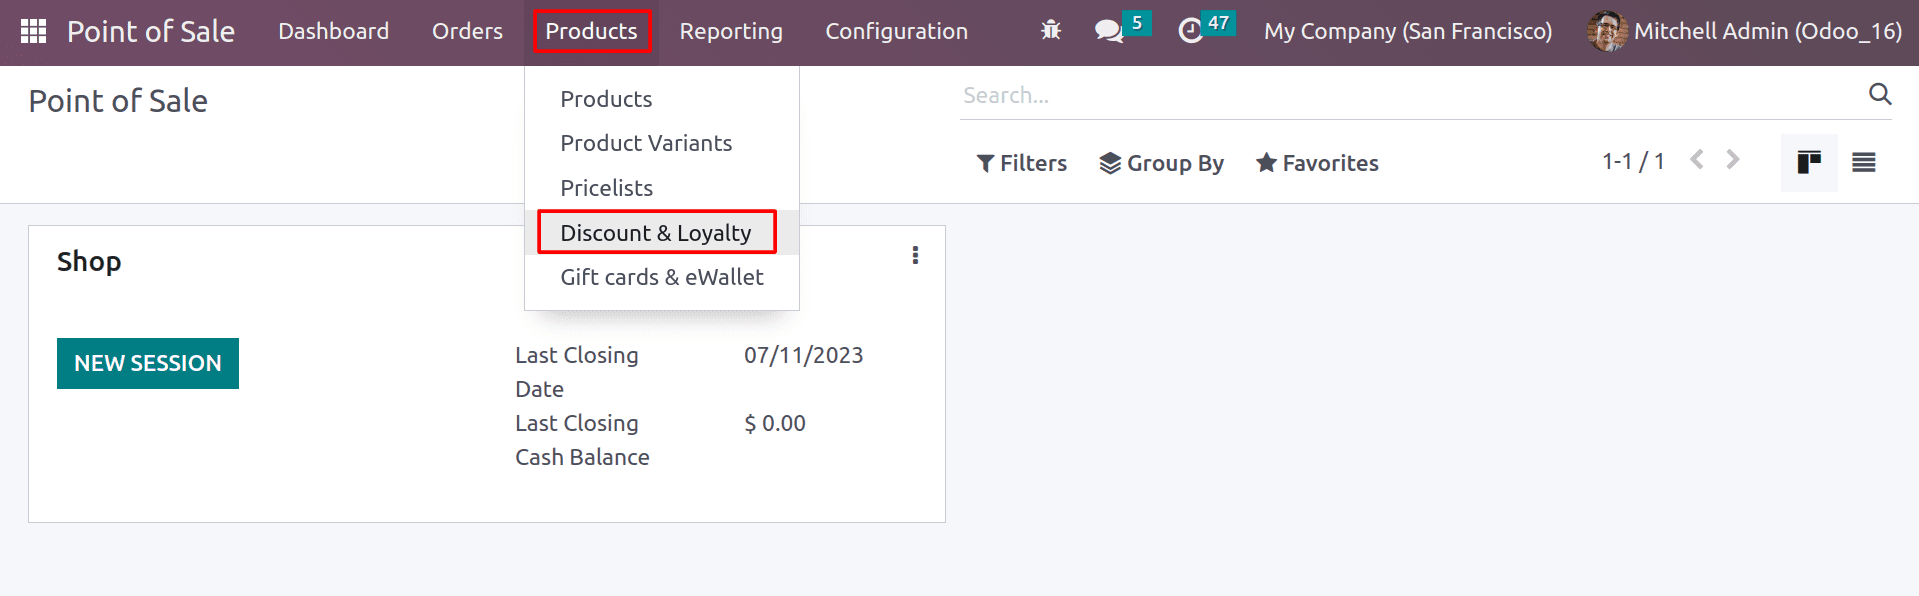 An Overview of Coupons and Promotion in Odoo 16 POS-cybrosys